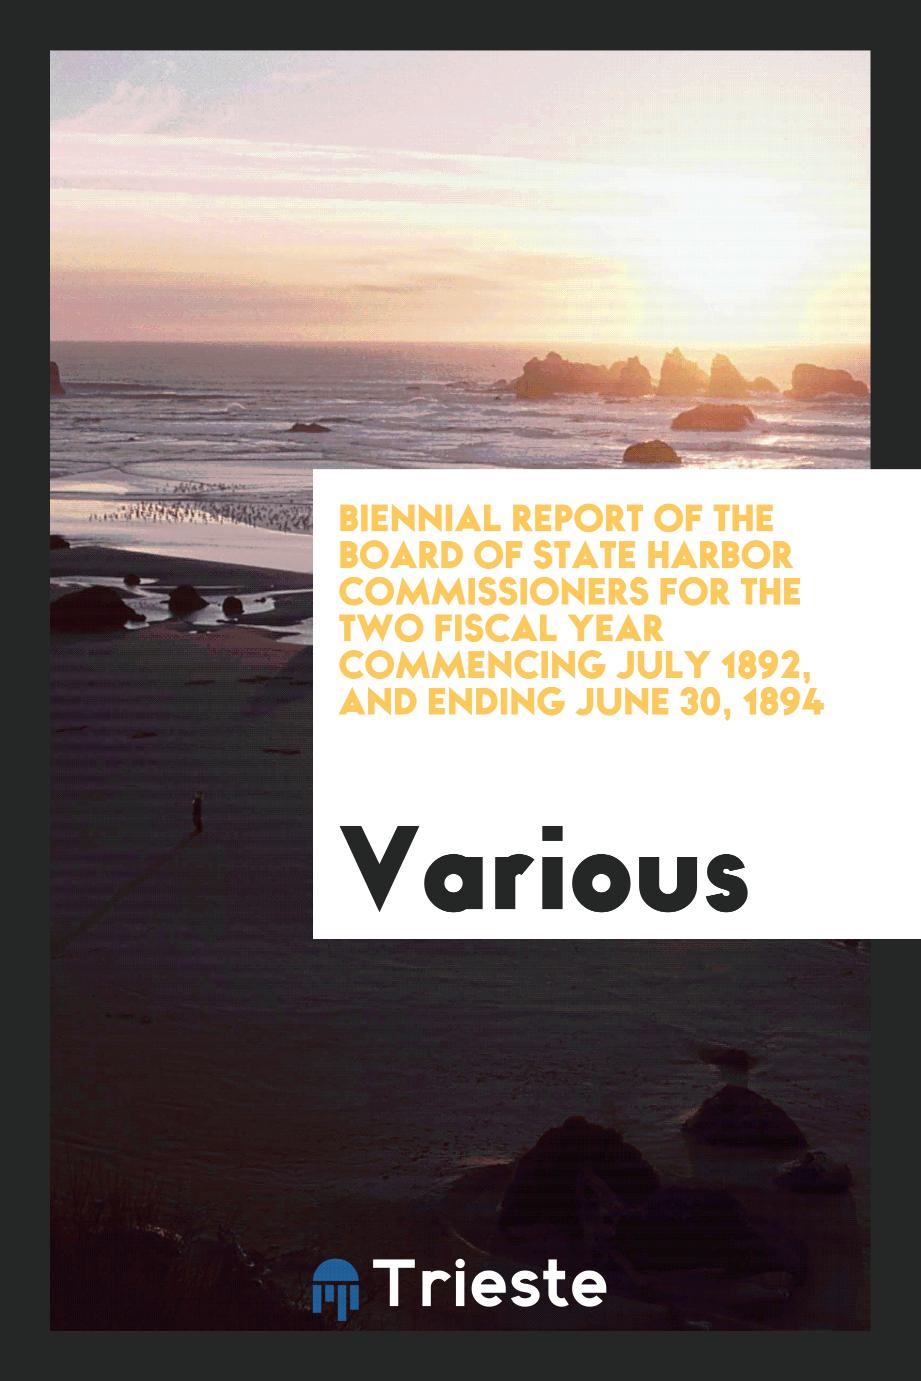 Biennial report of the Board of State Harbor Commissioners for the Two Fiscal Year Commencing July 1892, and Ending June 30, 1894